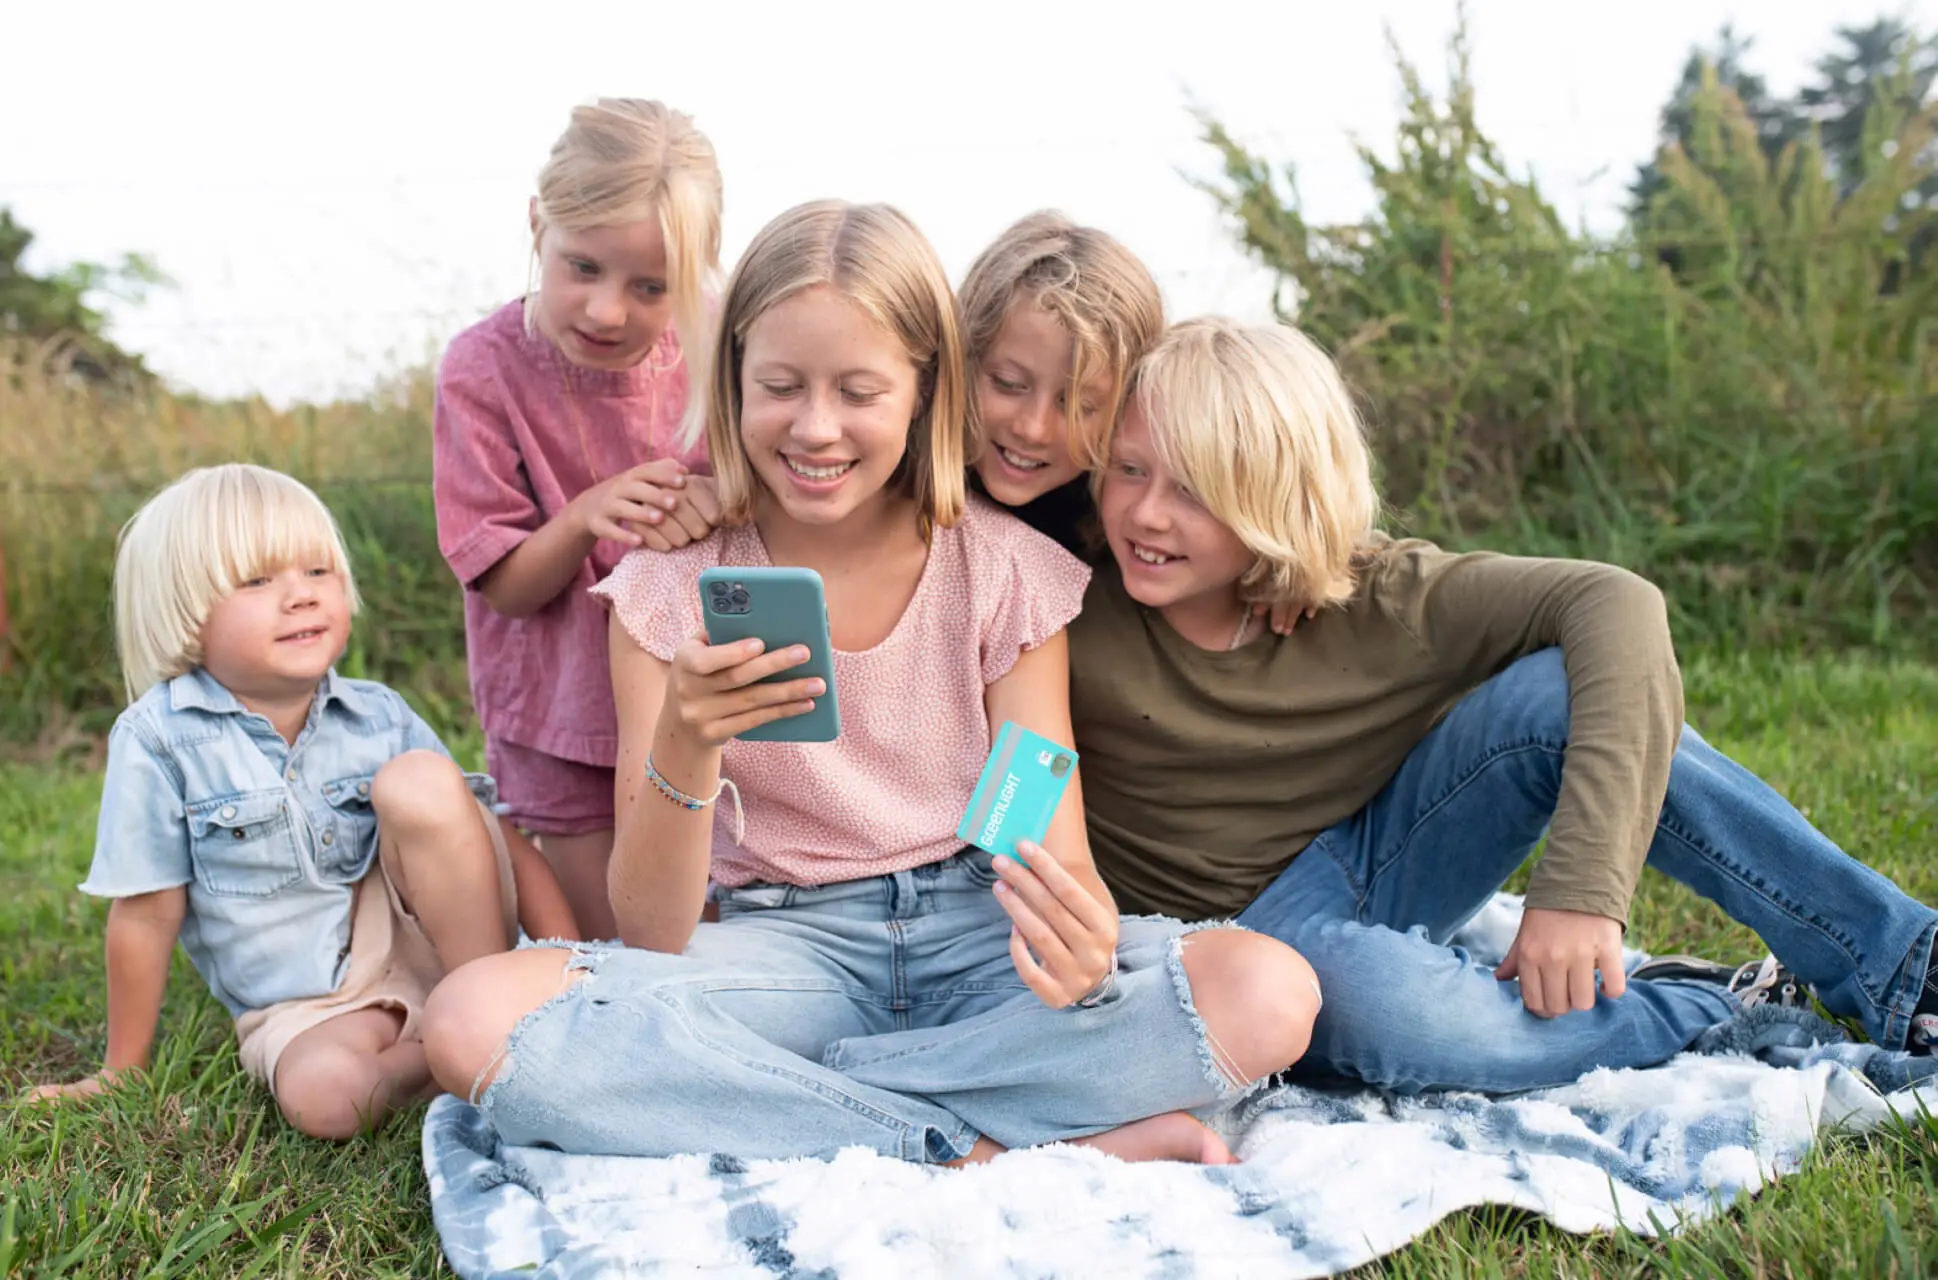 Five siblings outside on the grass playing financial literacy games with Greenlight's money app